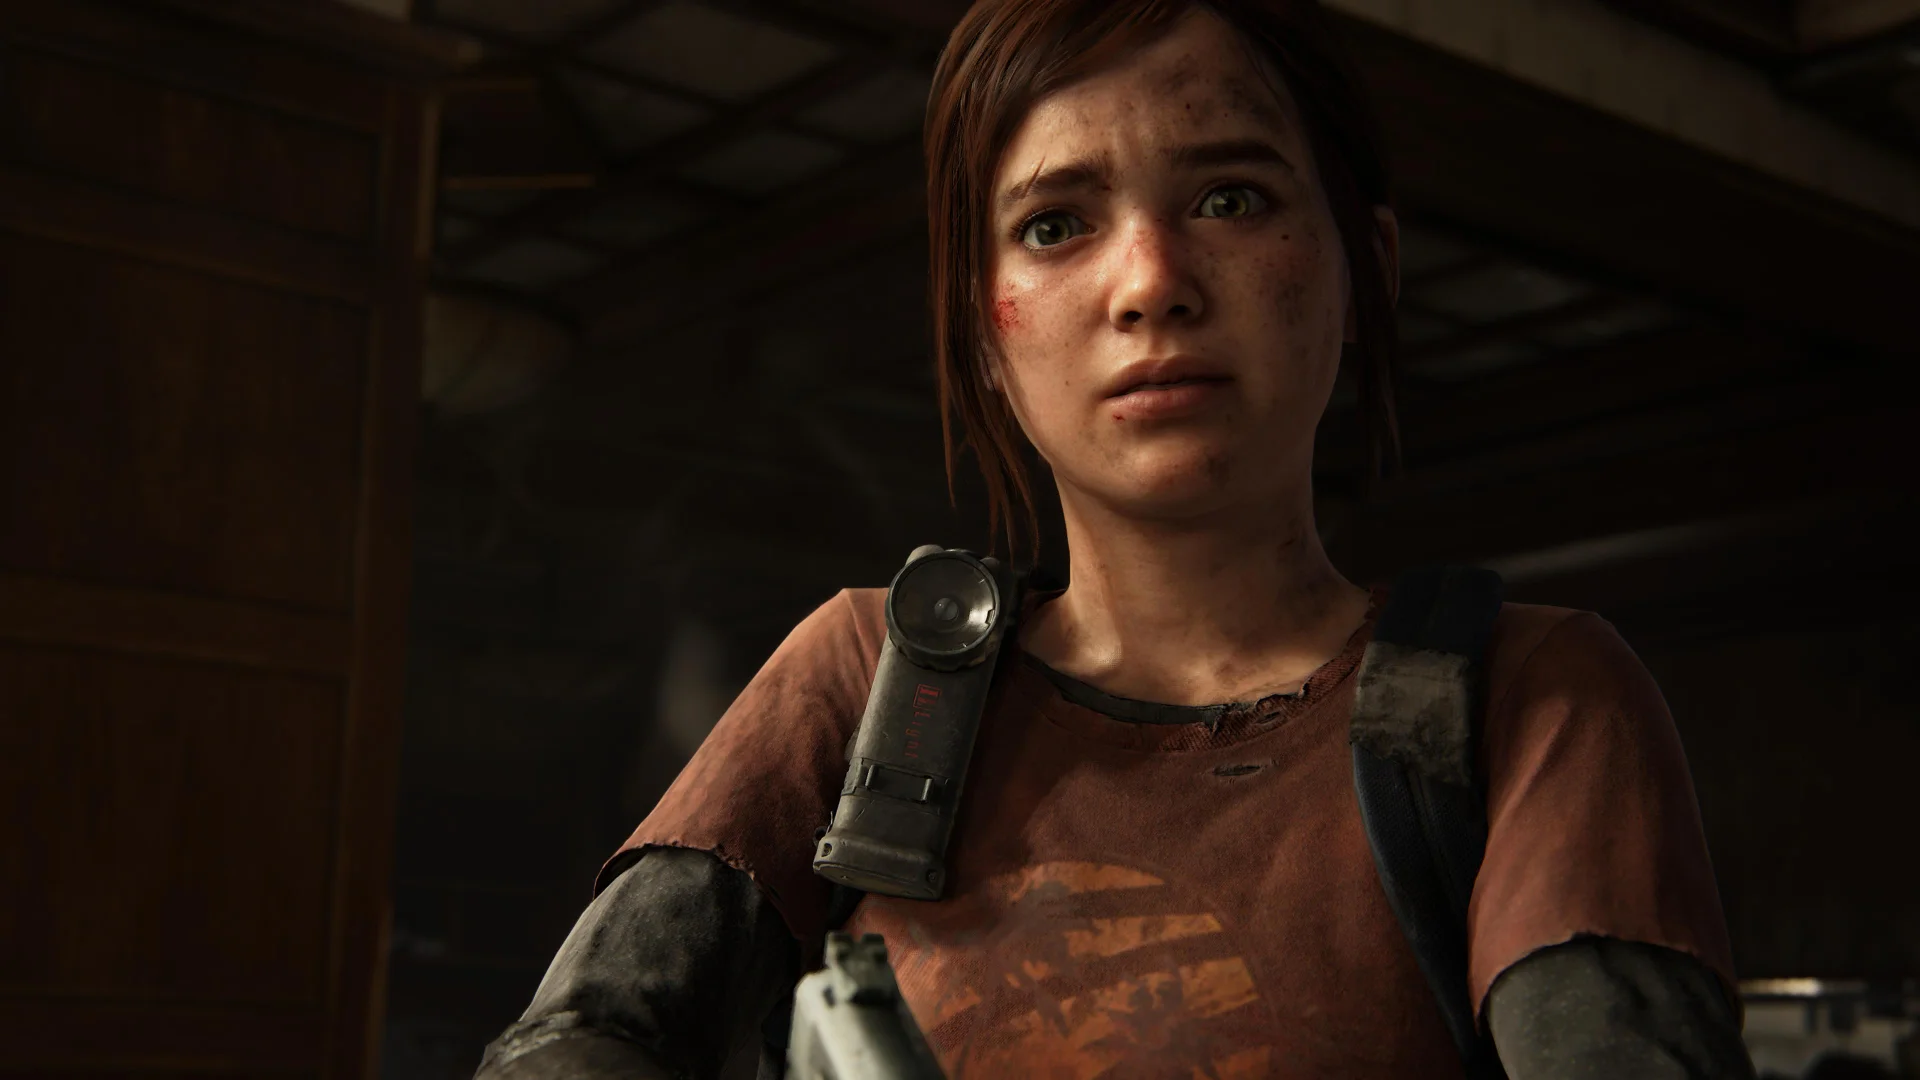 The Last of Us Part 1 on PC is delayed thanks to the HBO show